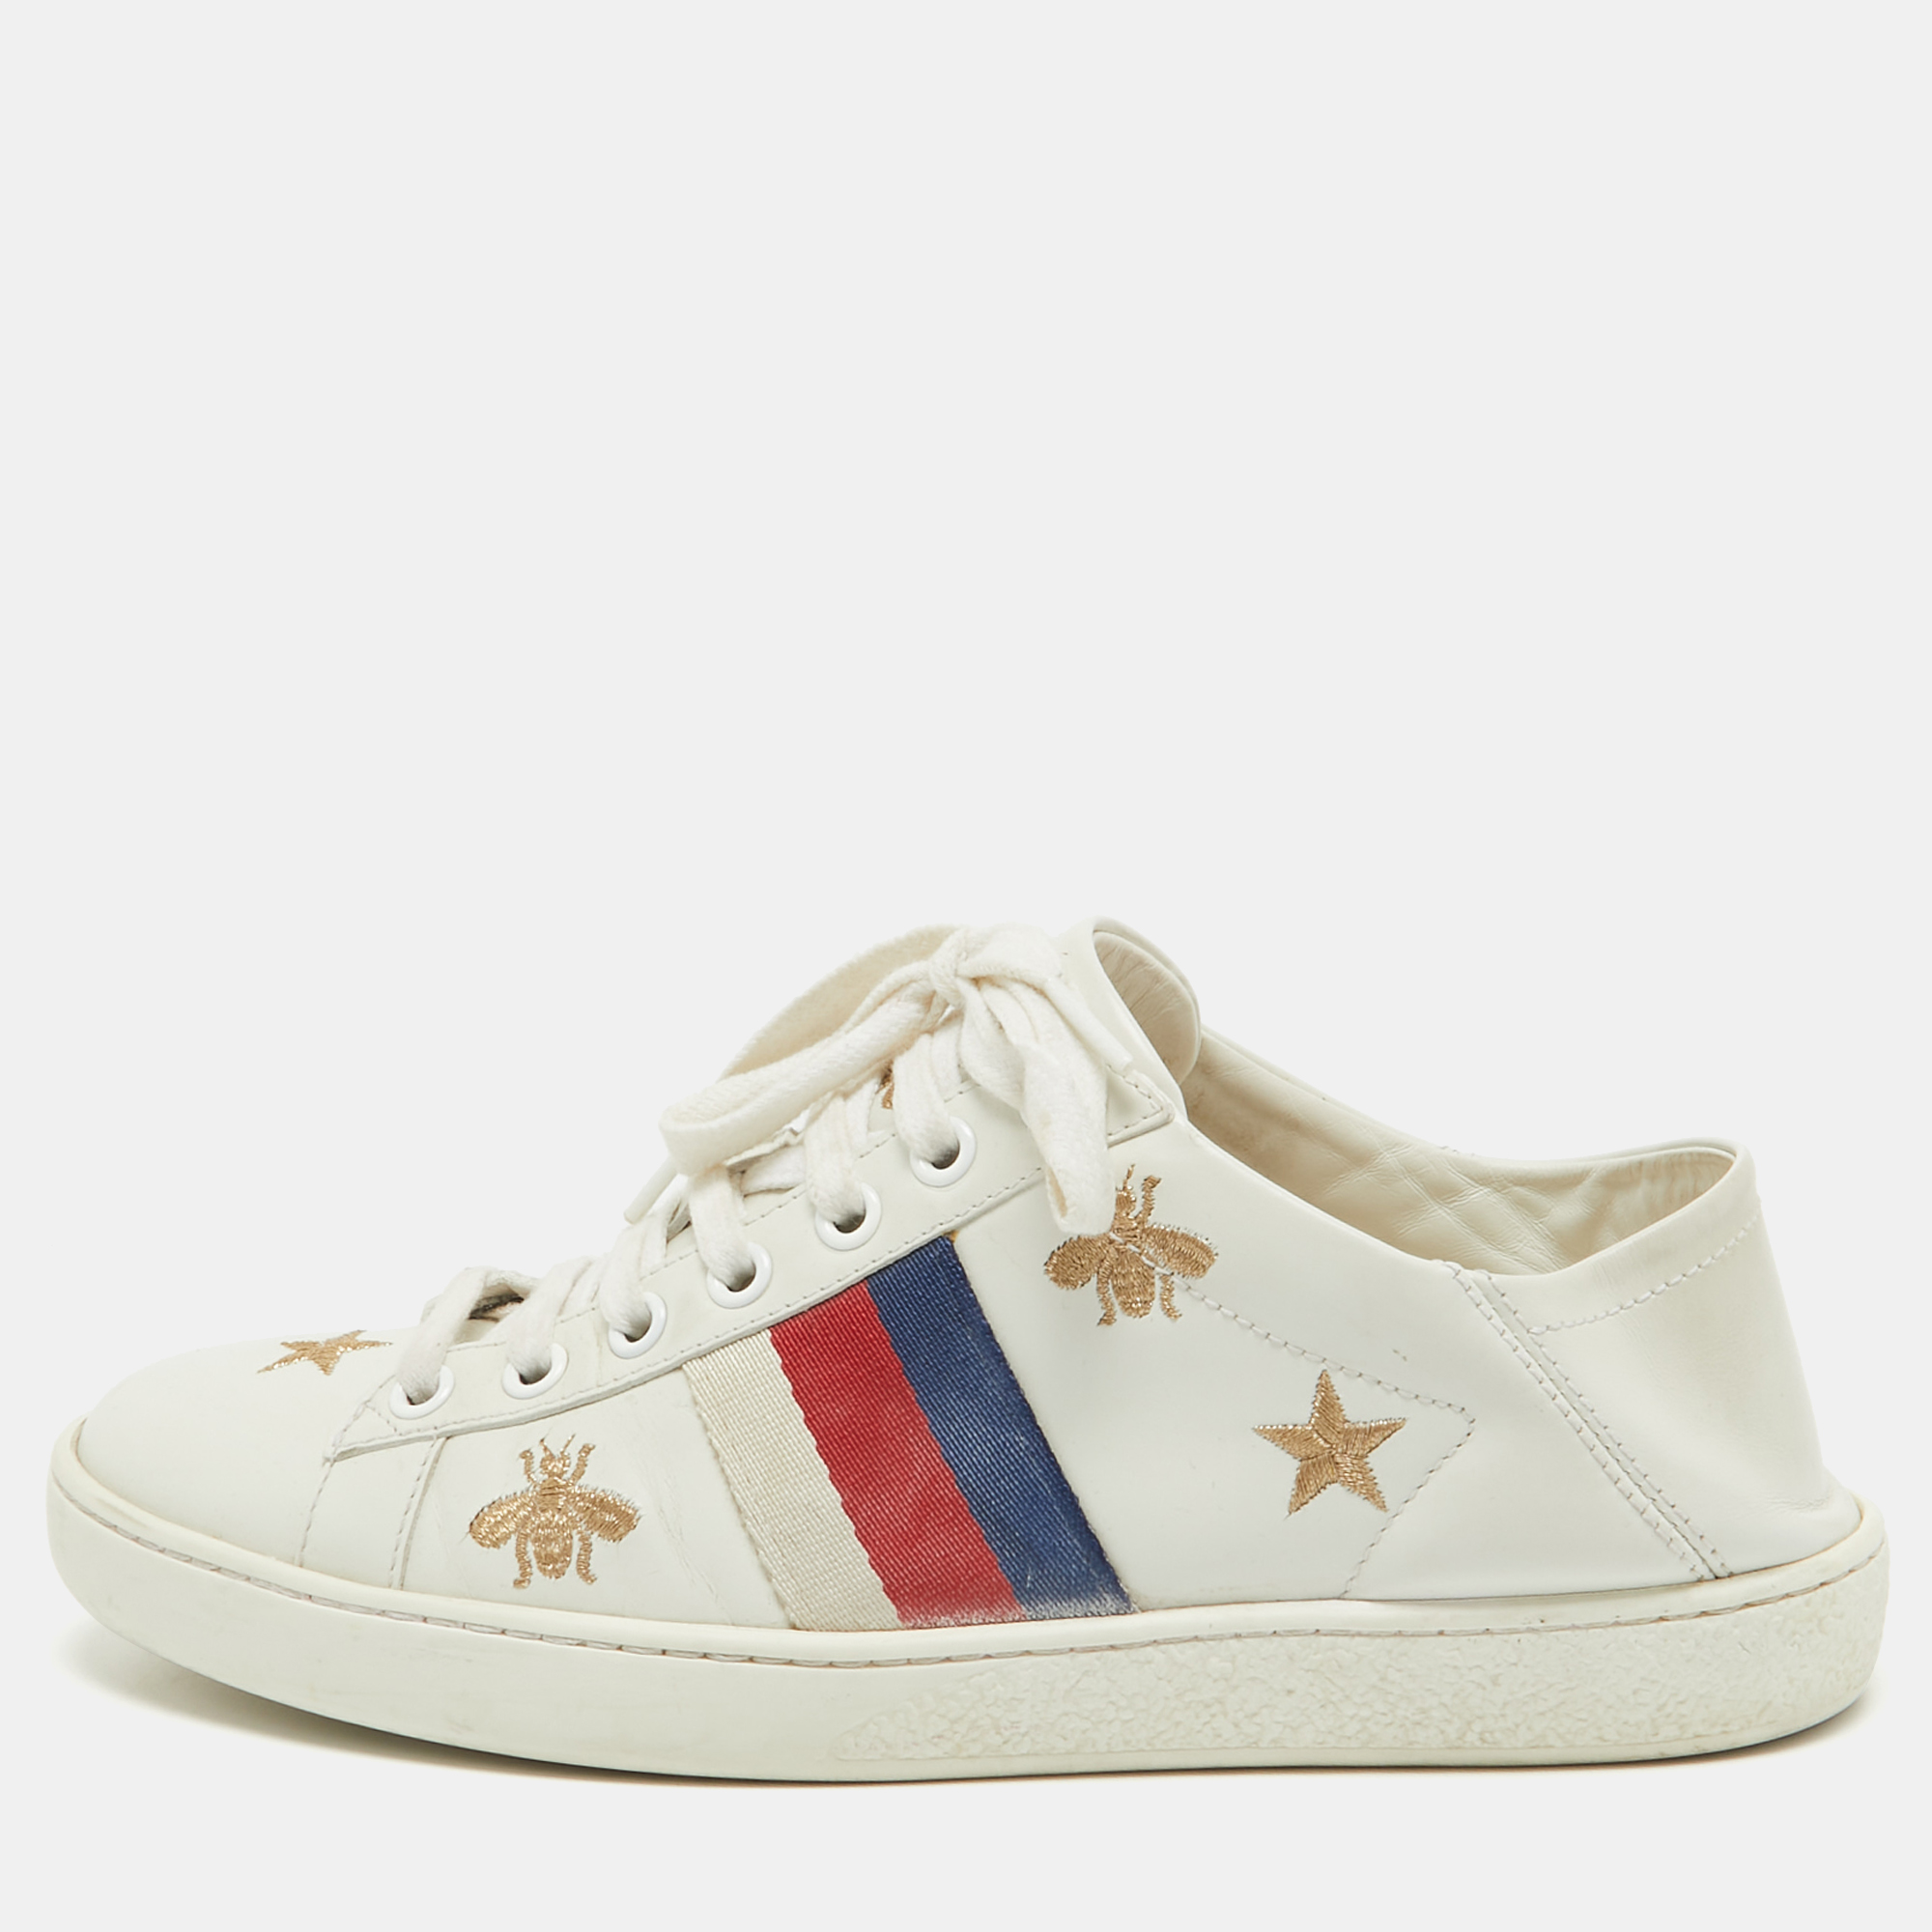 Gucci white leather star and bee embroidered ace sneakers size 36